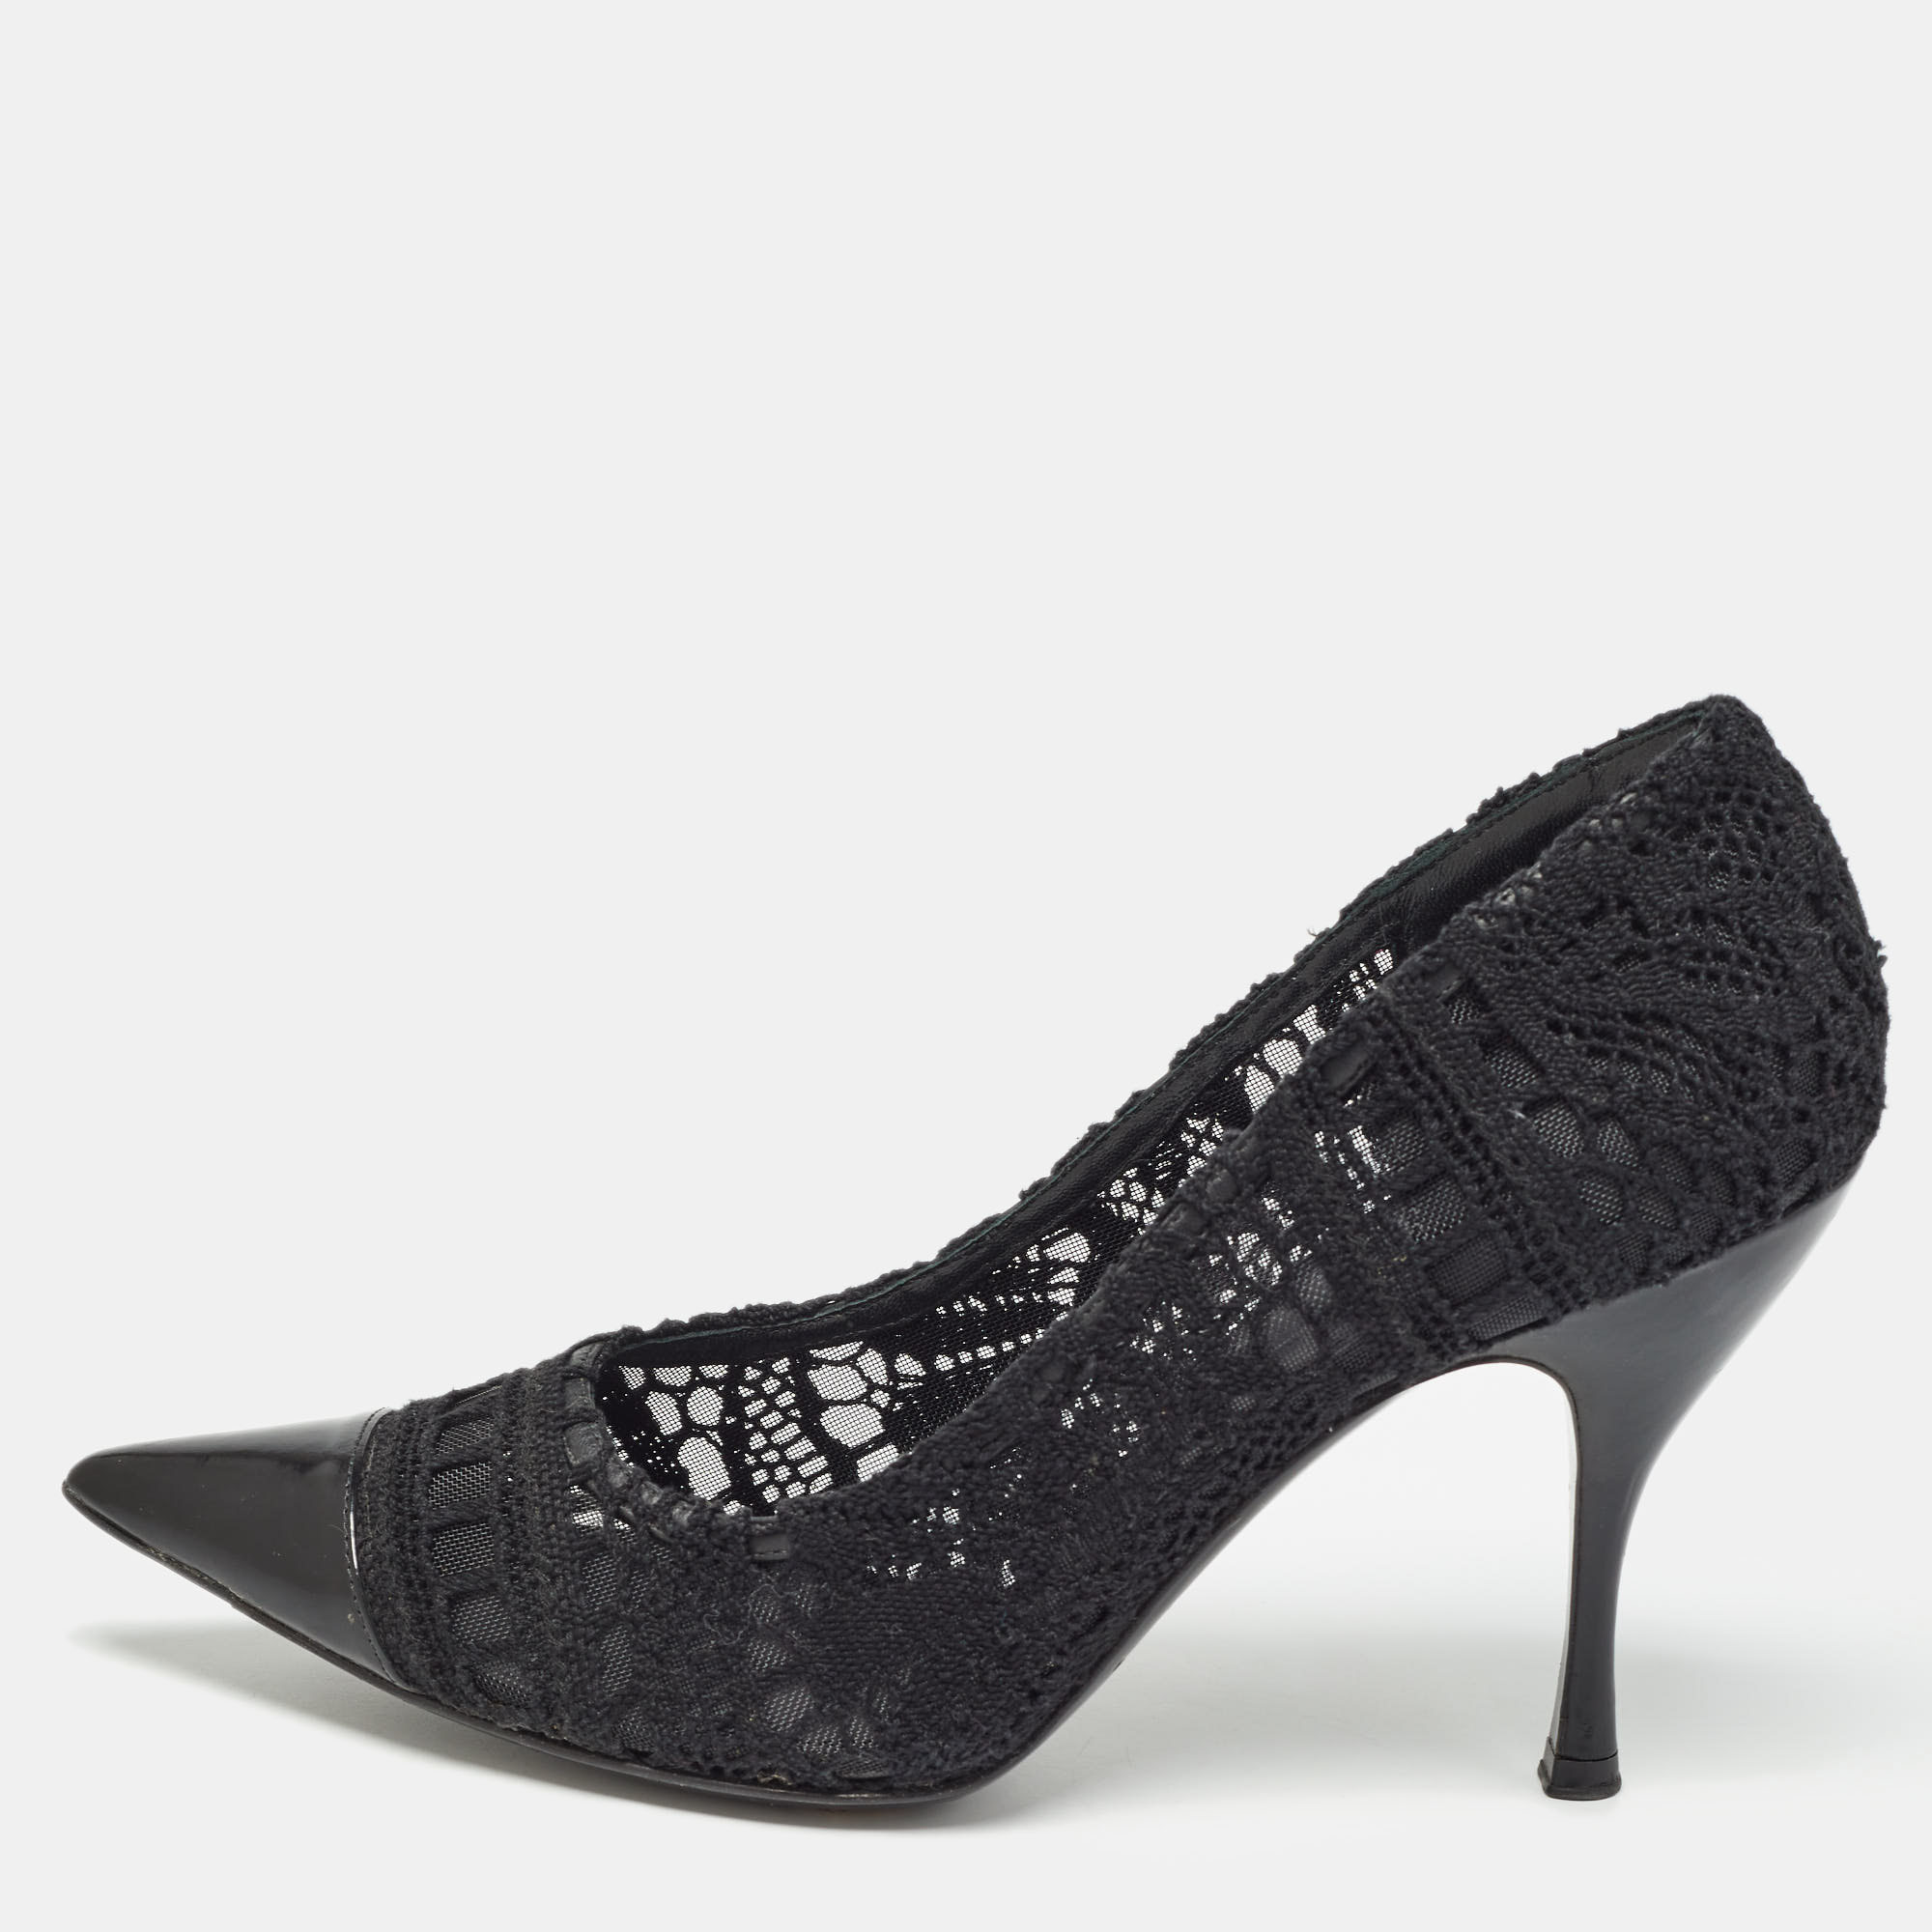 

Dolce & Gabbana Black Lace And Leather Crochet Pointed Toe Pumps Size